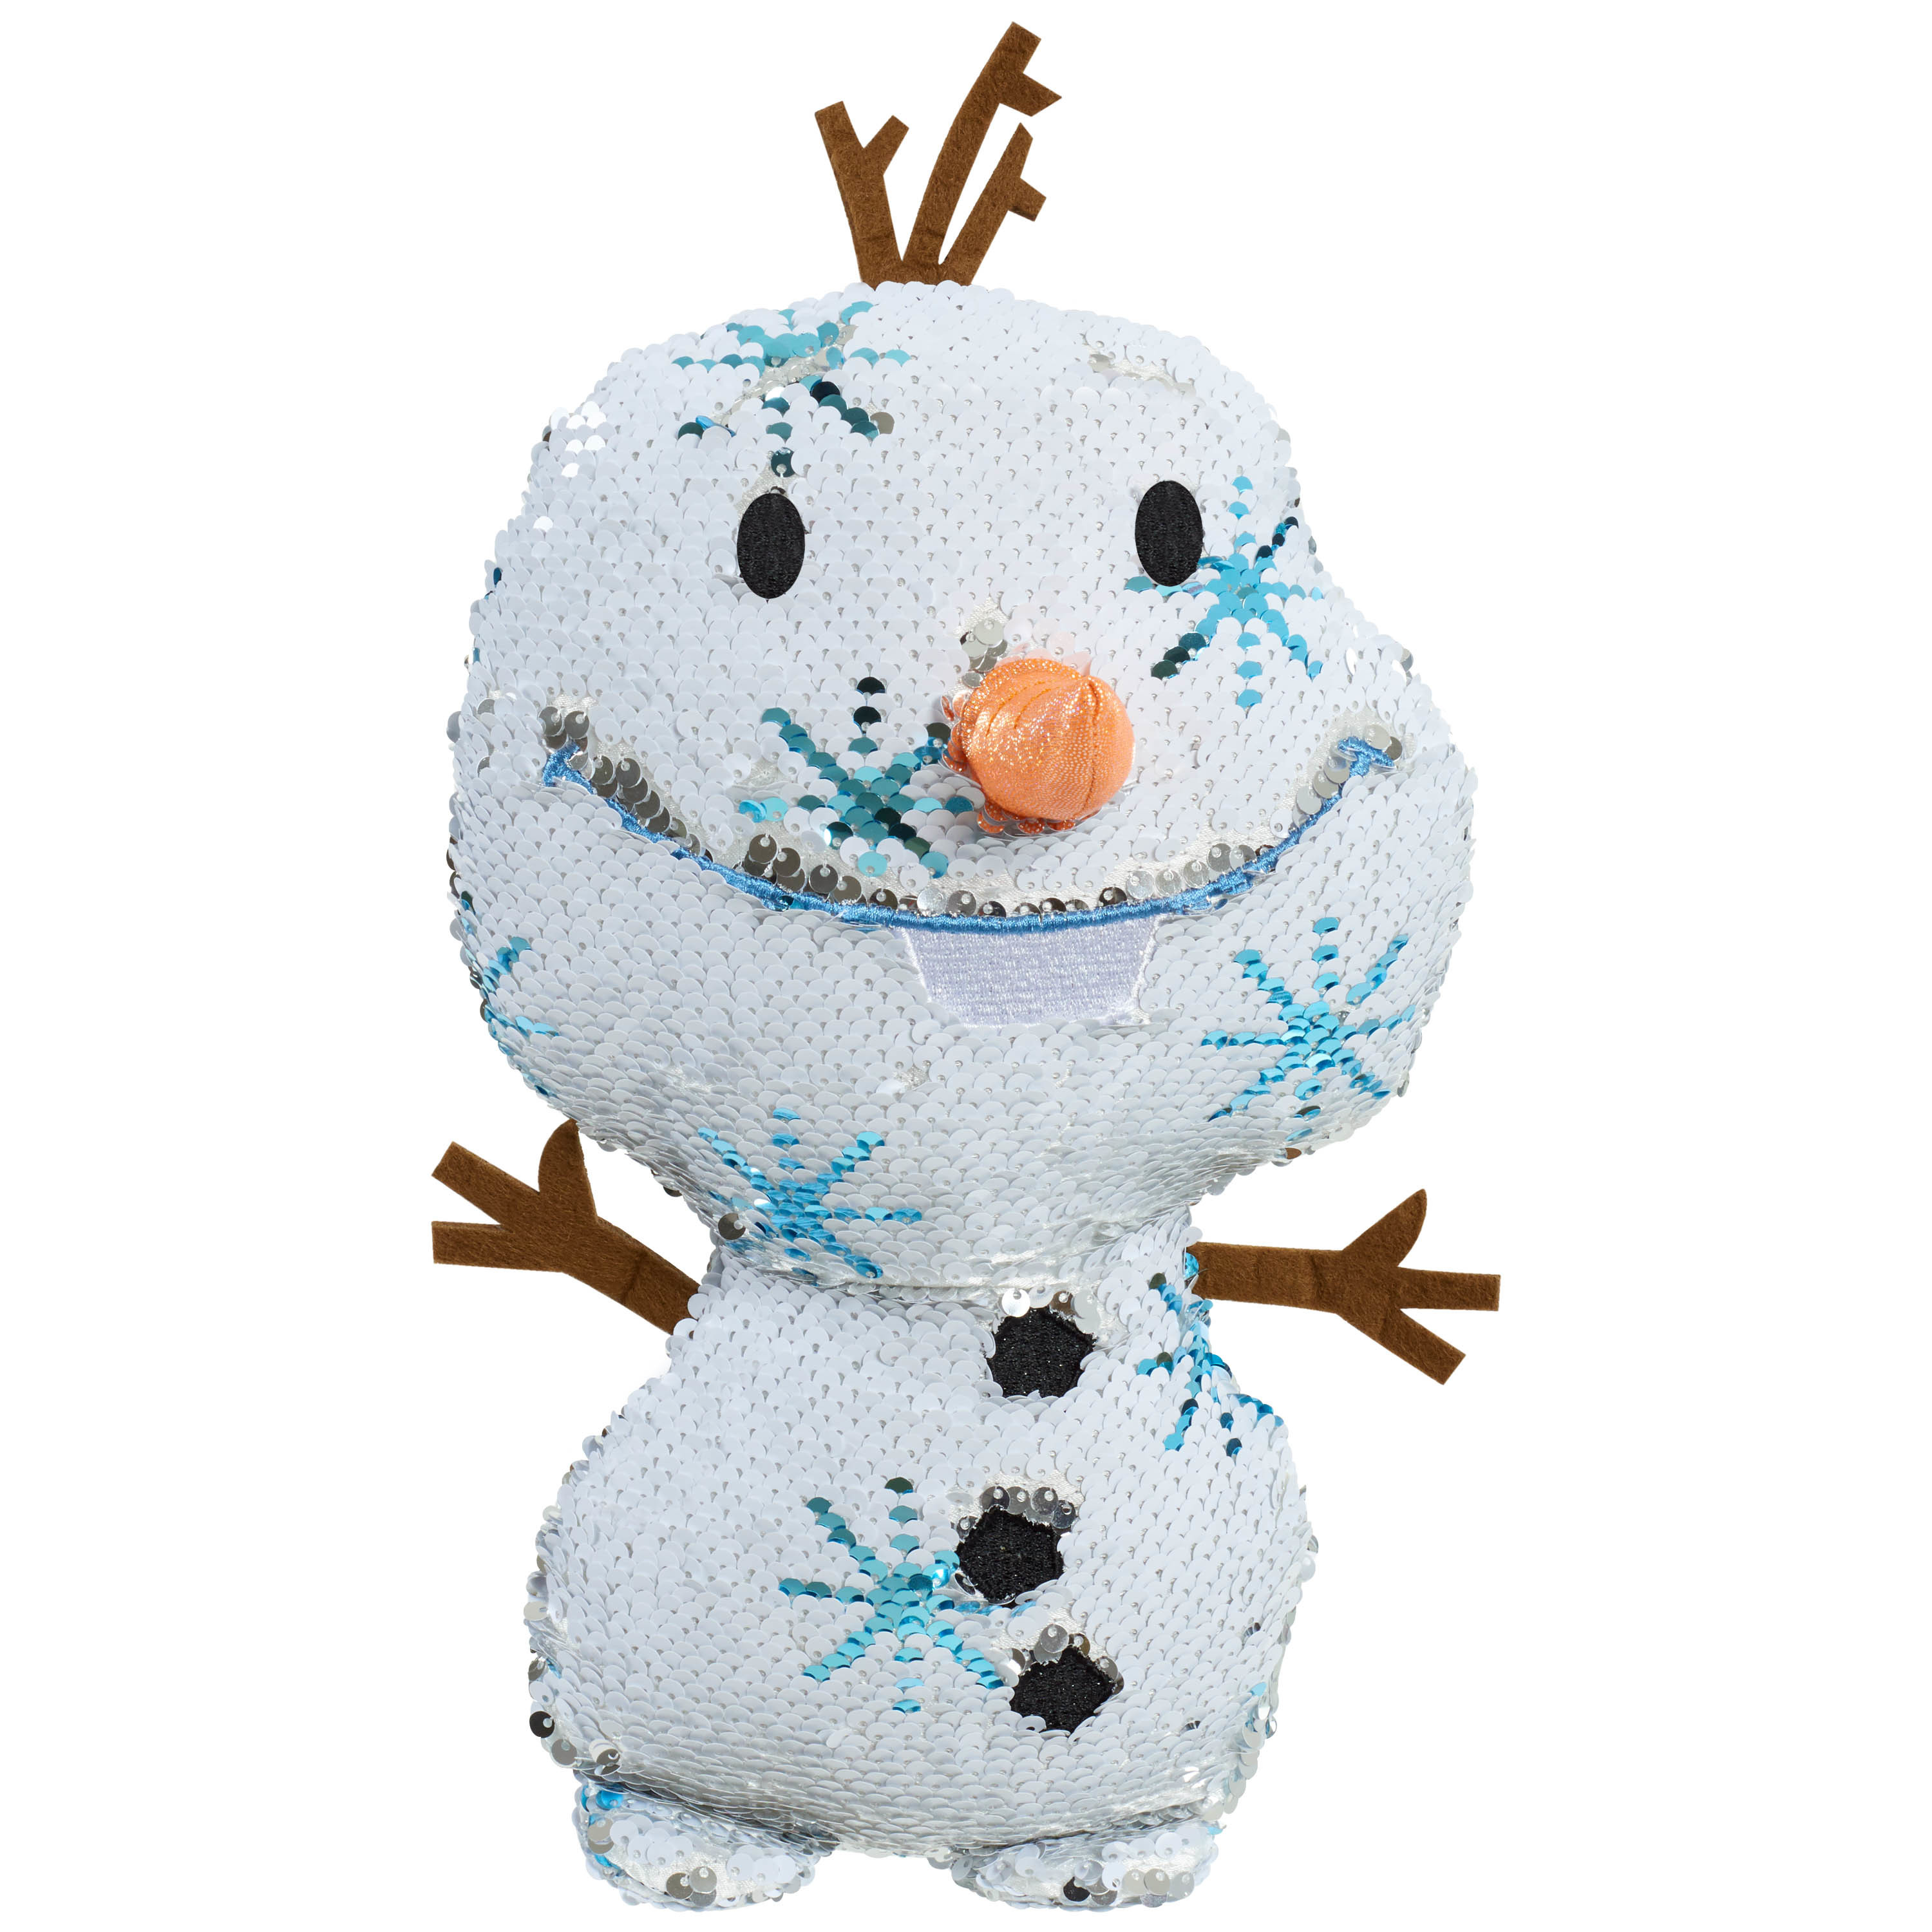 Disney Frozen 2 Reversible Sequins Large Plush Olaf, Officially Licensed Kids Toys for Ages 3 Up, Gifts and Presents - image 3 of 5